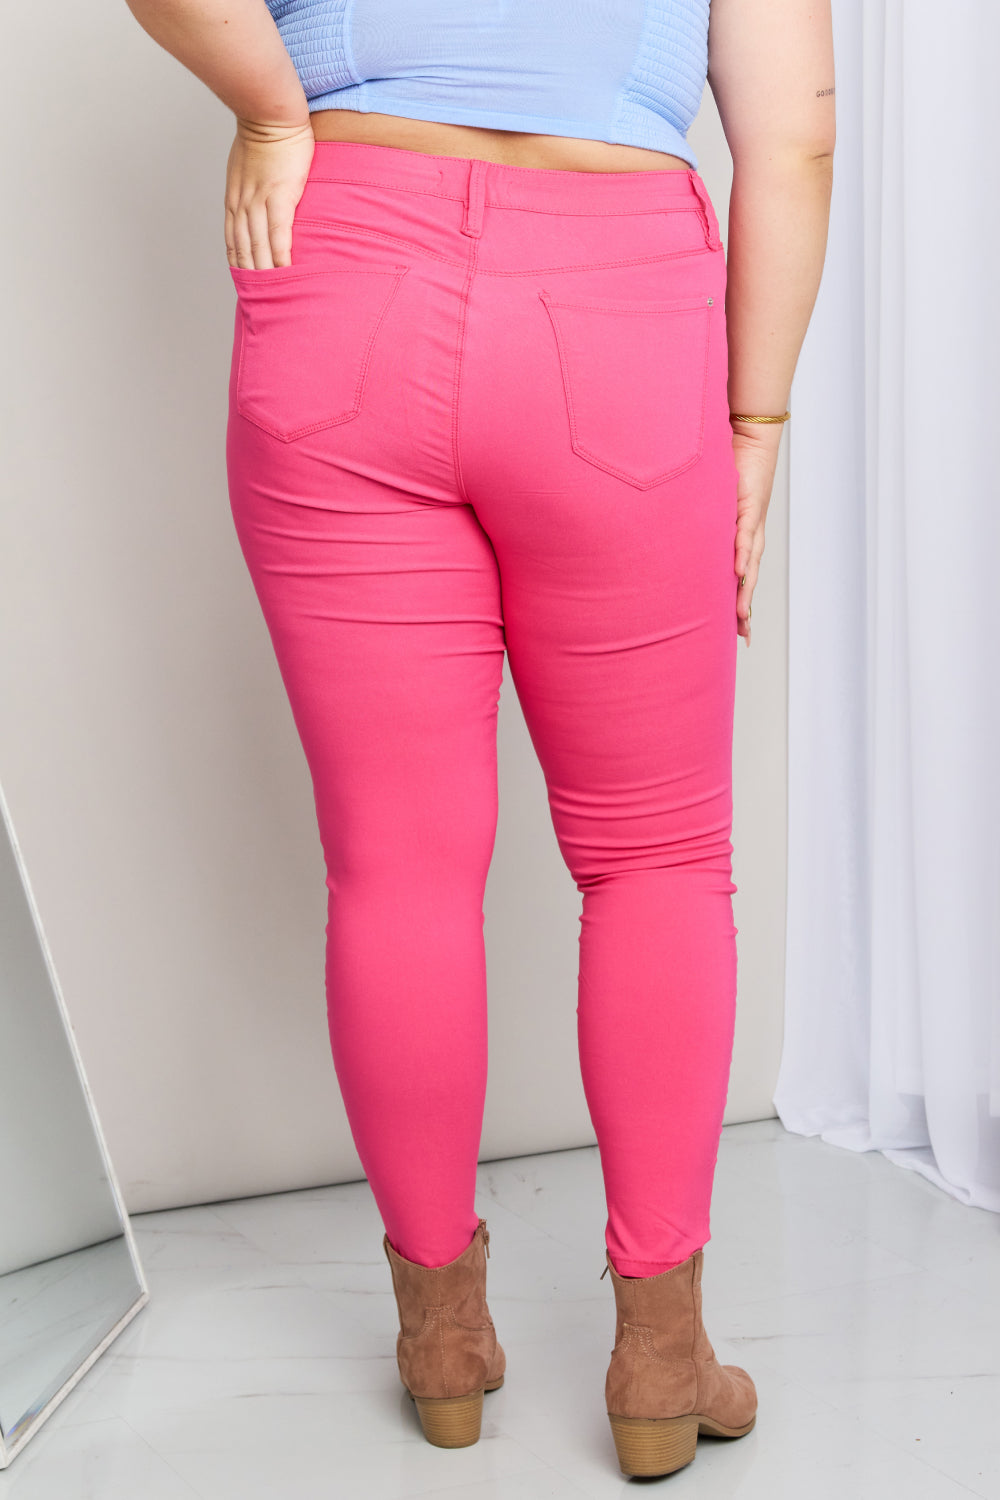 Kate Hyper-Stretch Mid-Rise Skinny Jeans in Fiery Coral